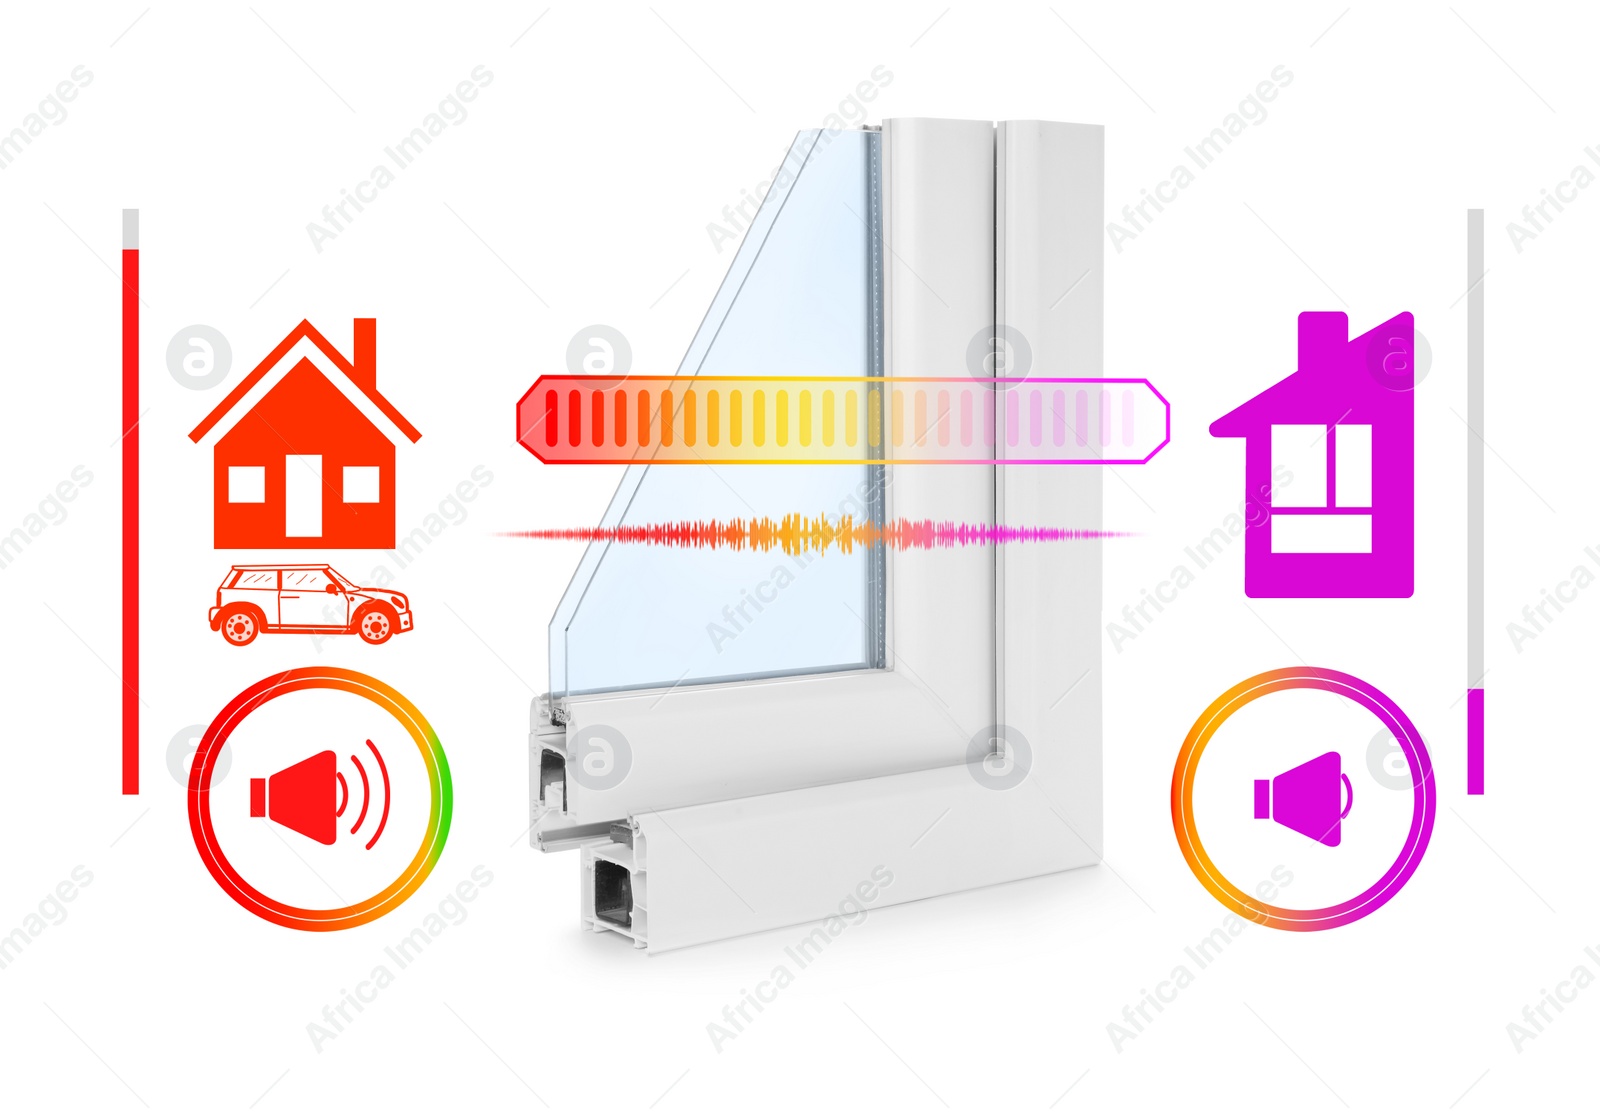 Image of Window profile sample and illustrations on white background demonstrating noise cancelling effect